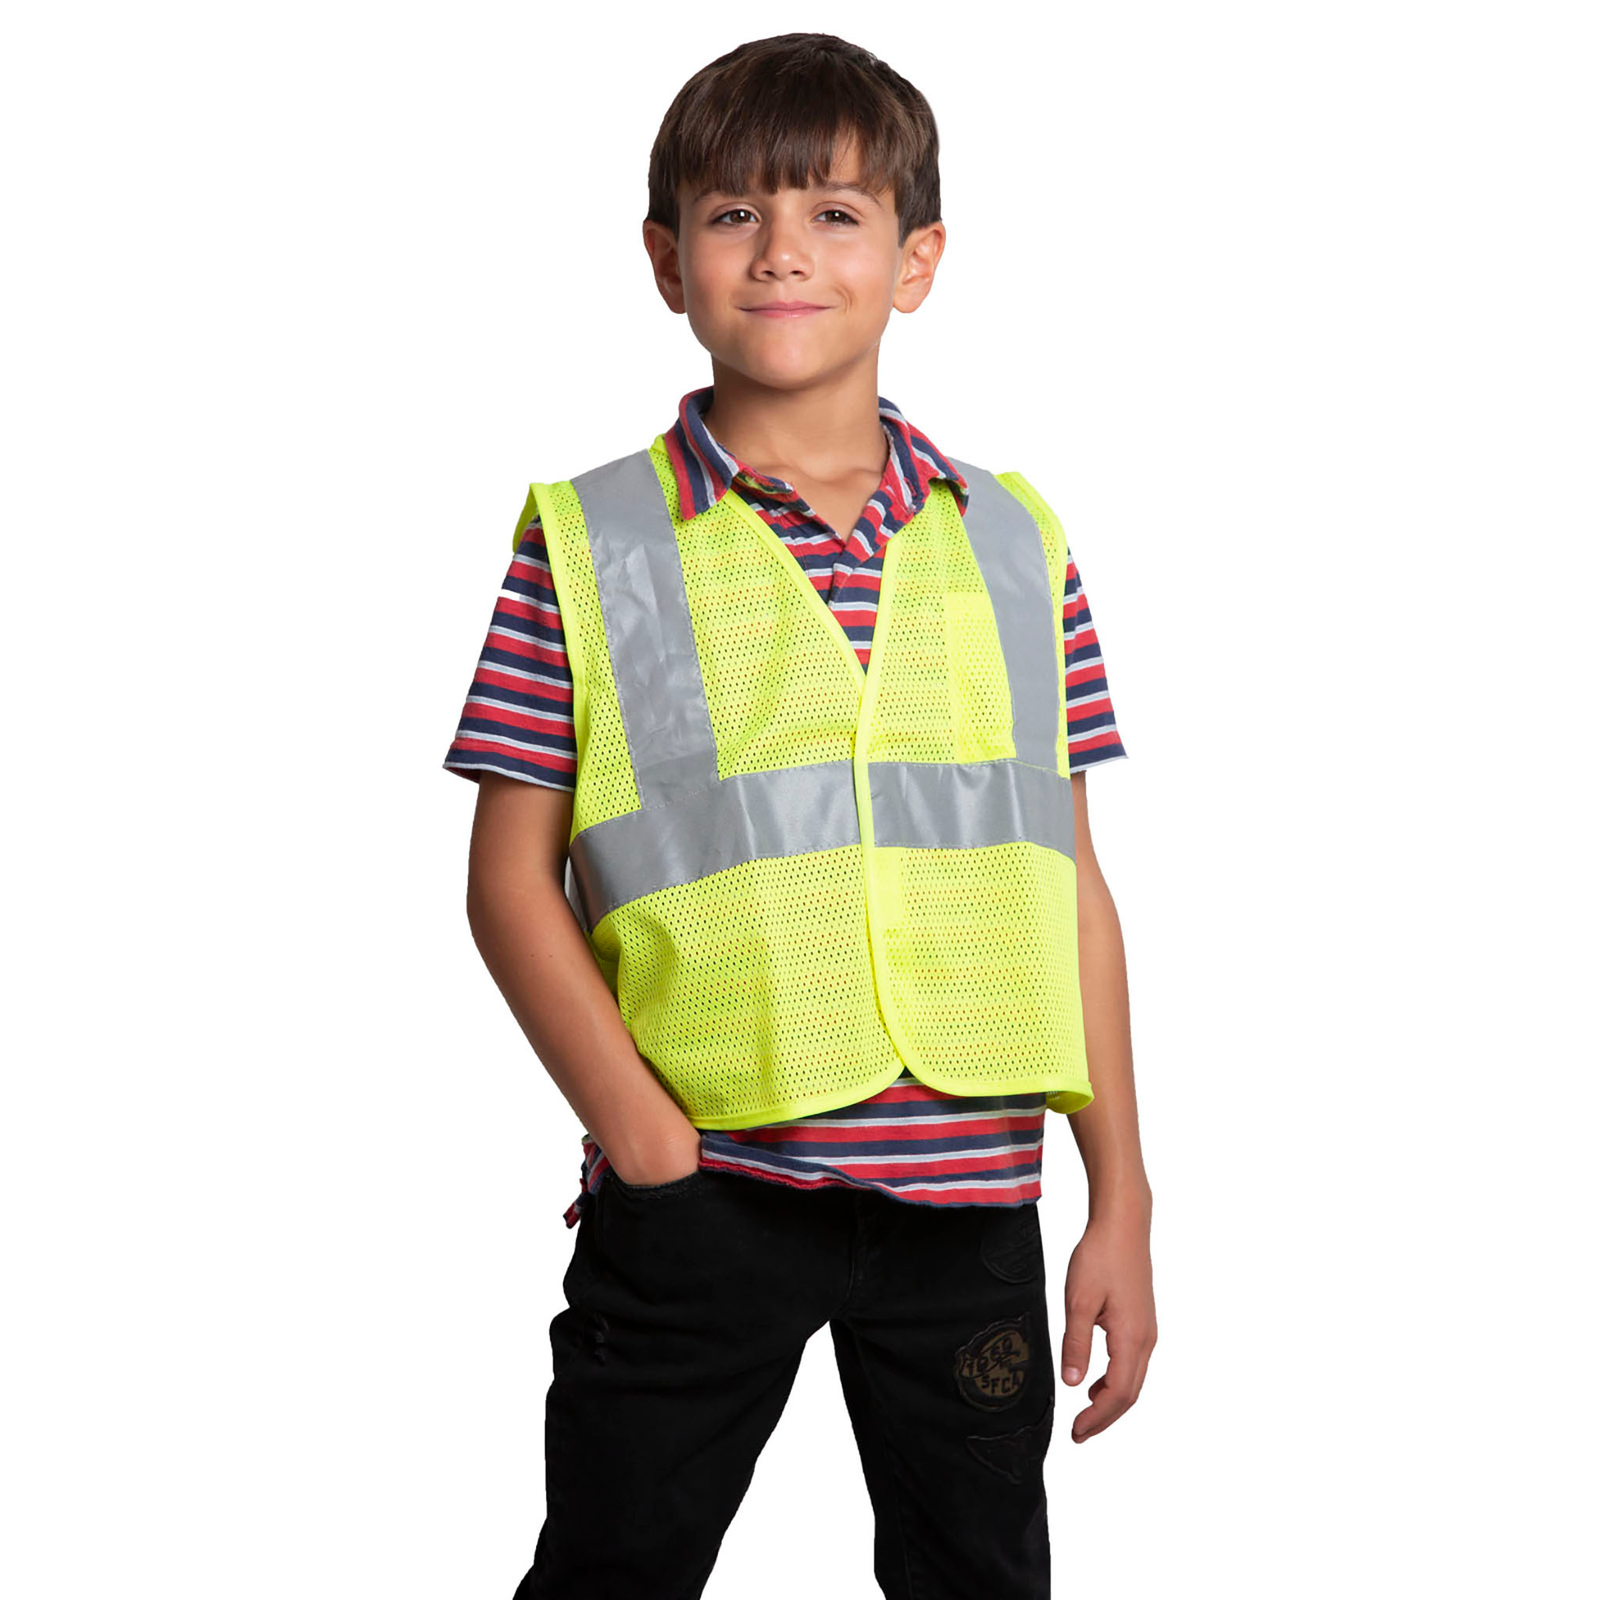 Kid wearing a lime high visibility JORESTECH safety vest over his clothes